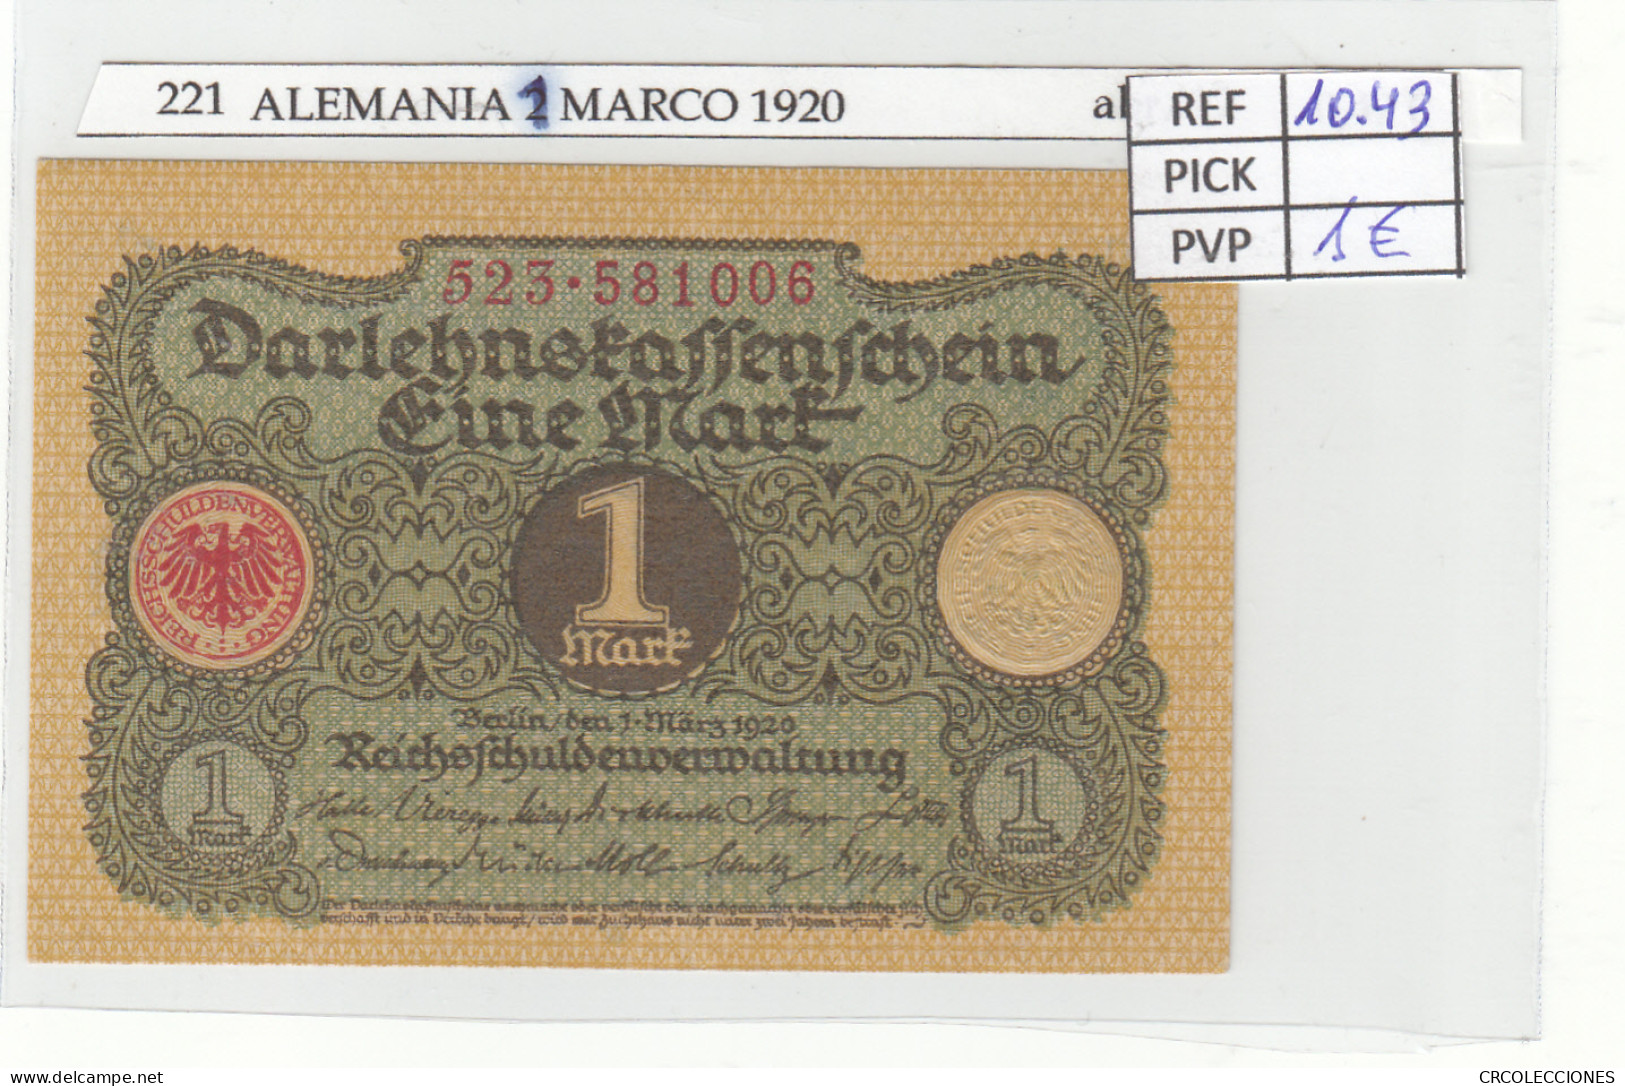 BILLETE ALEMANIA 1 MARCO 1920 P-58 - Other - Europe